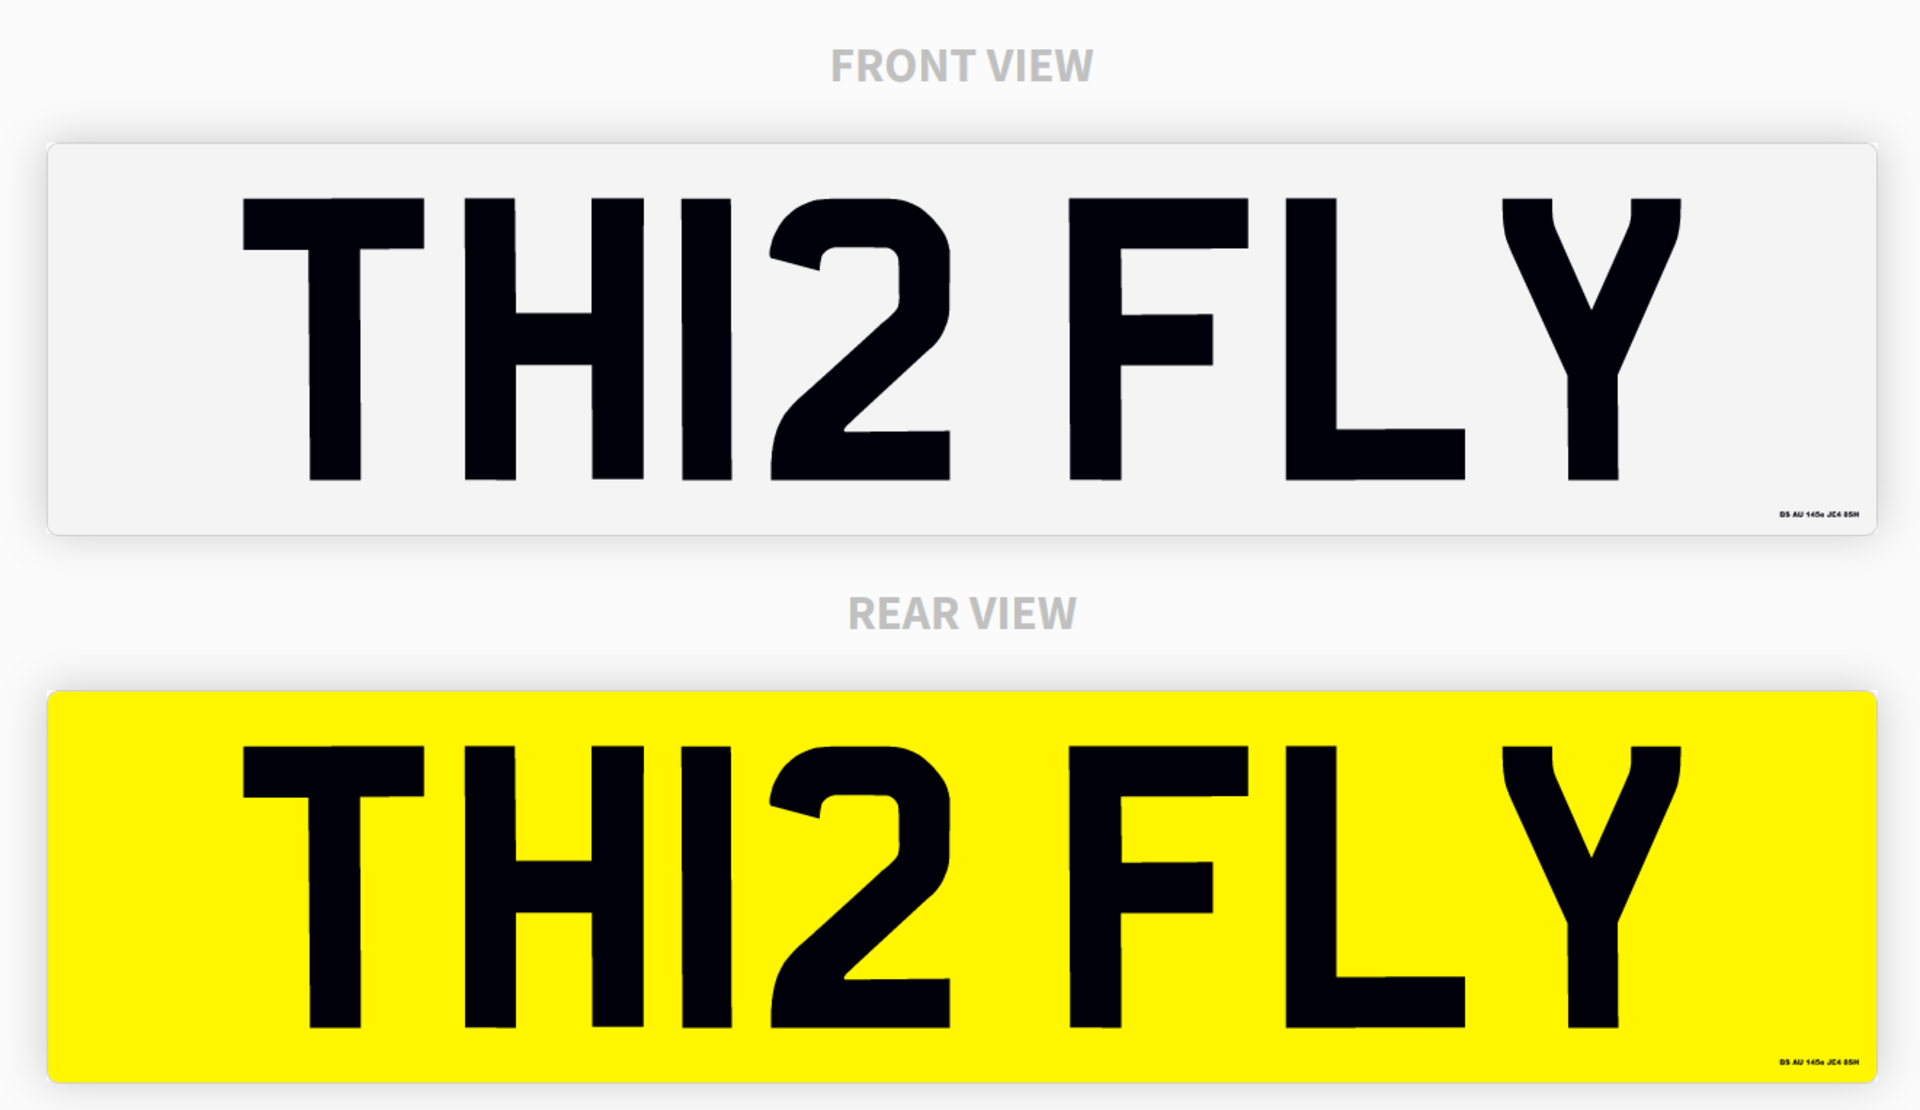 PRIVATE REGISTRATION """"TH12 FLY"""" *NO VAT*